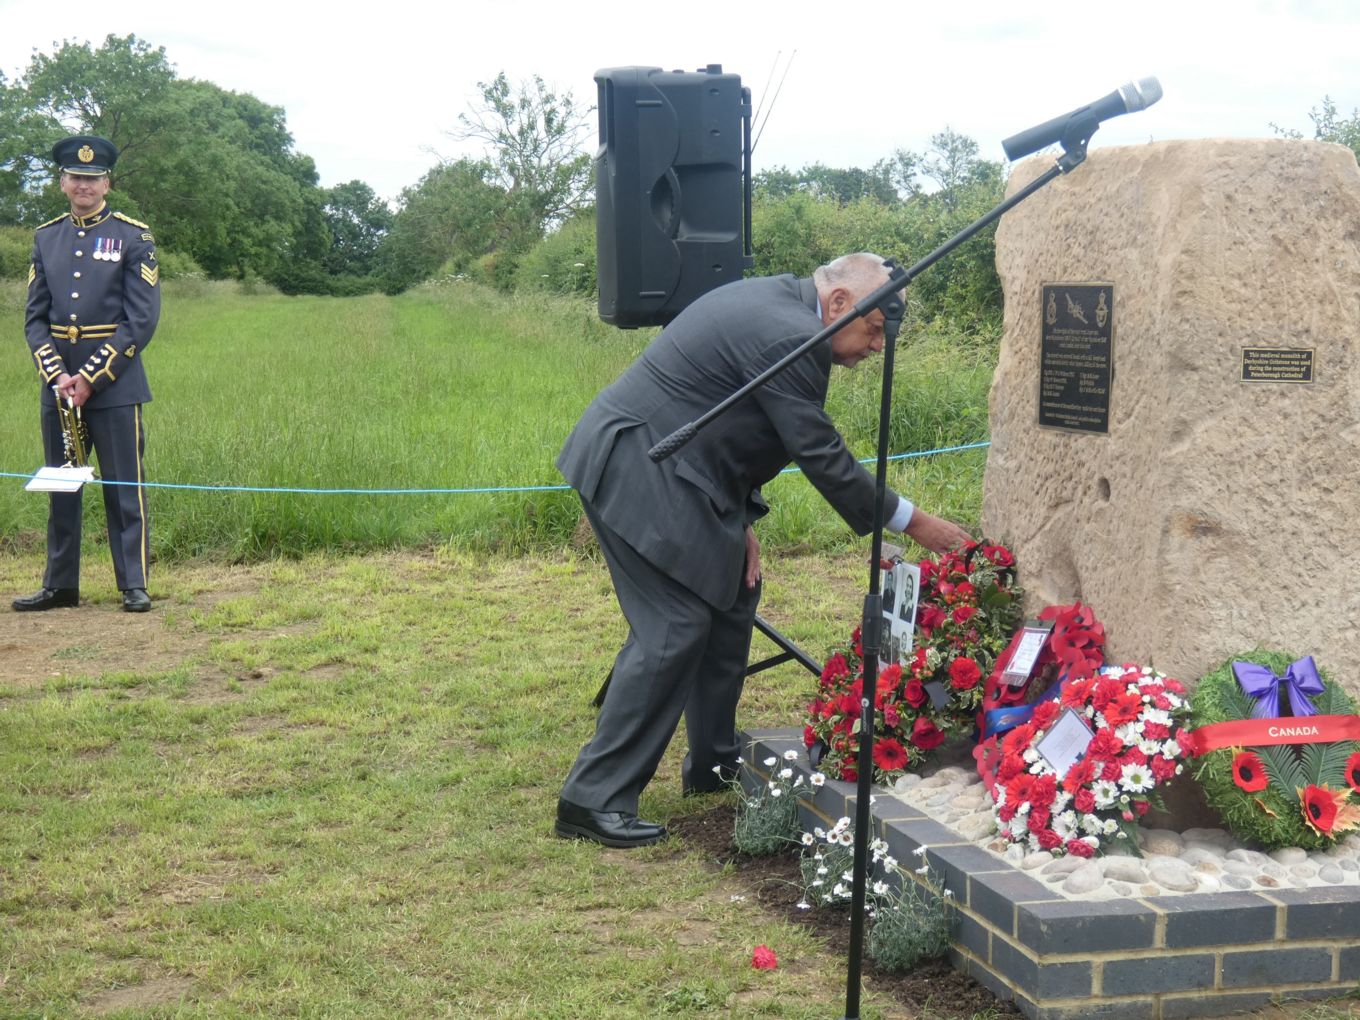 Mr Lindsay Alvis laying a wreath at the memorial. Microphone and speakers in shot too. 